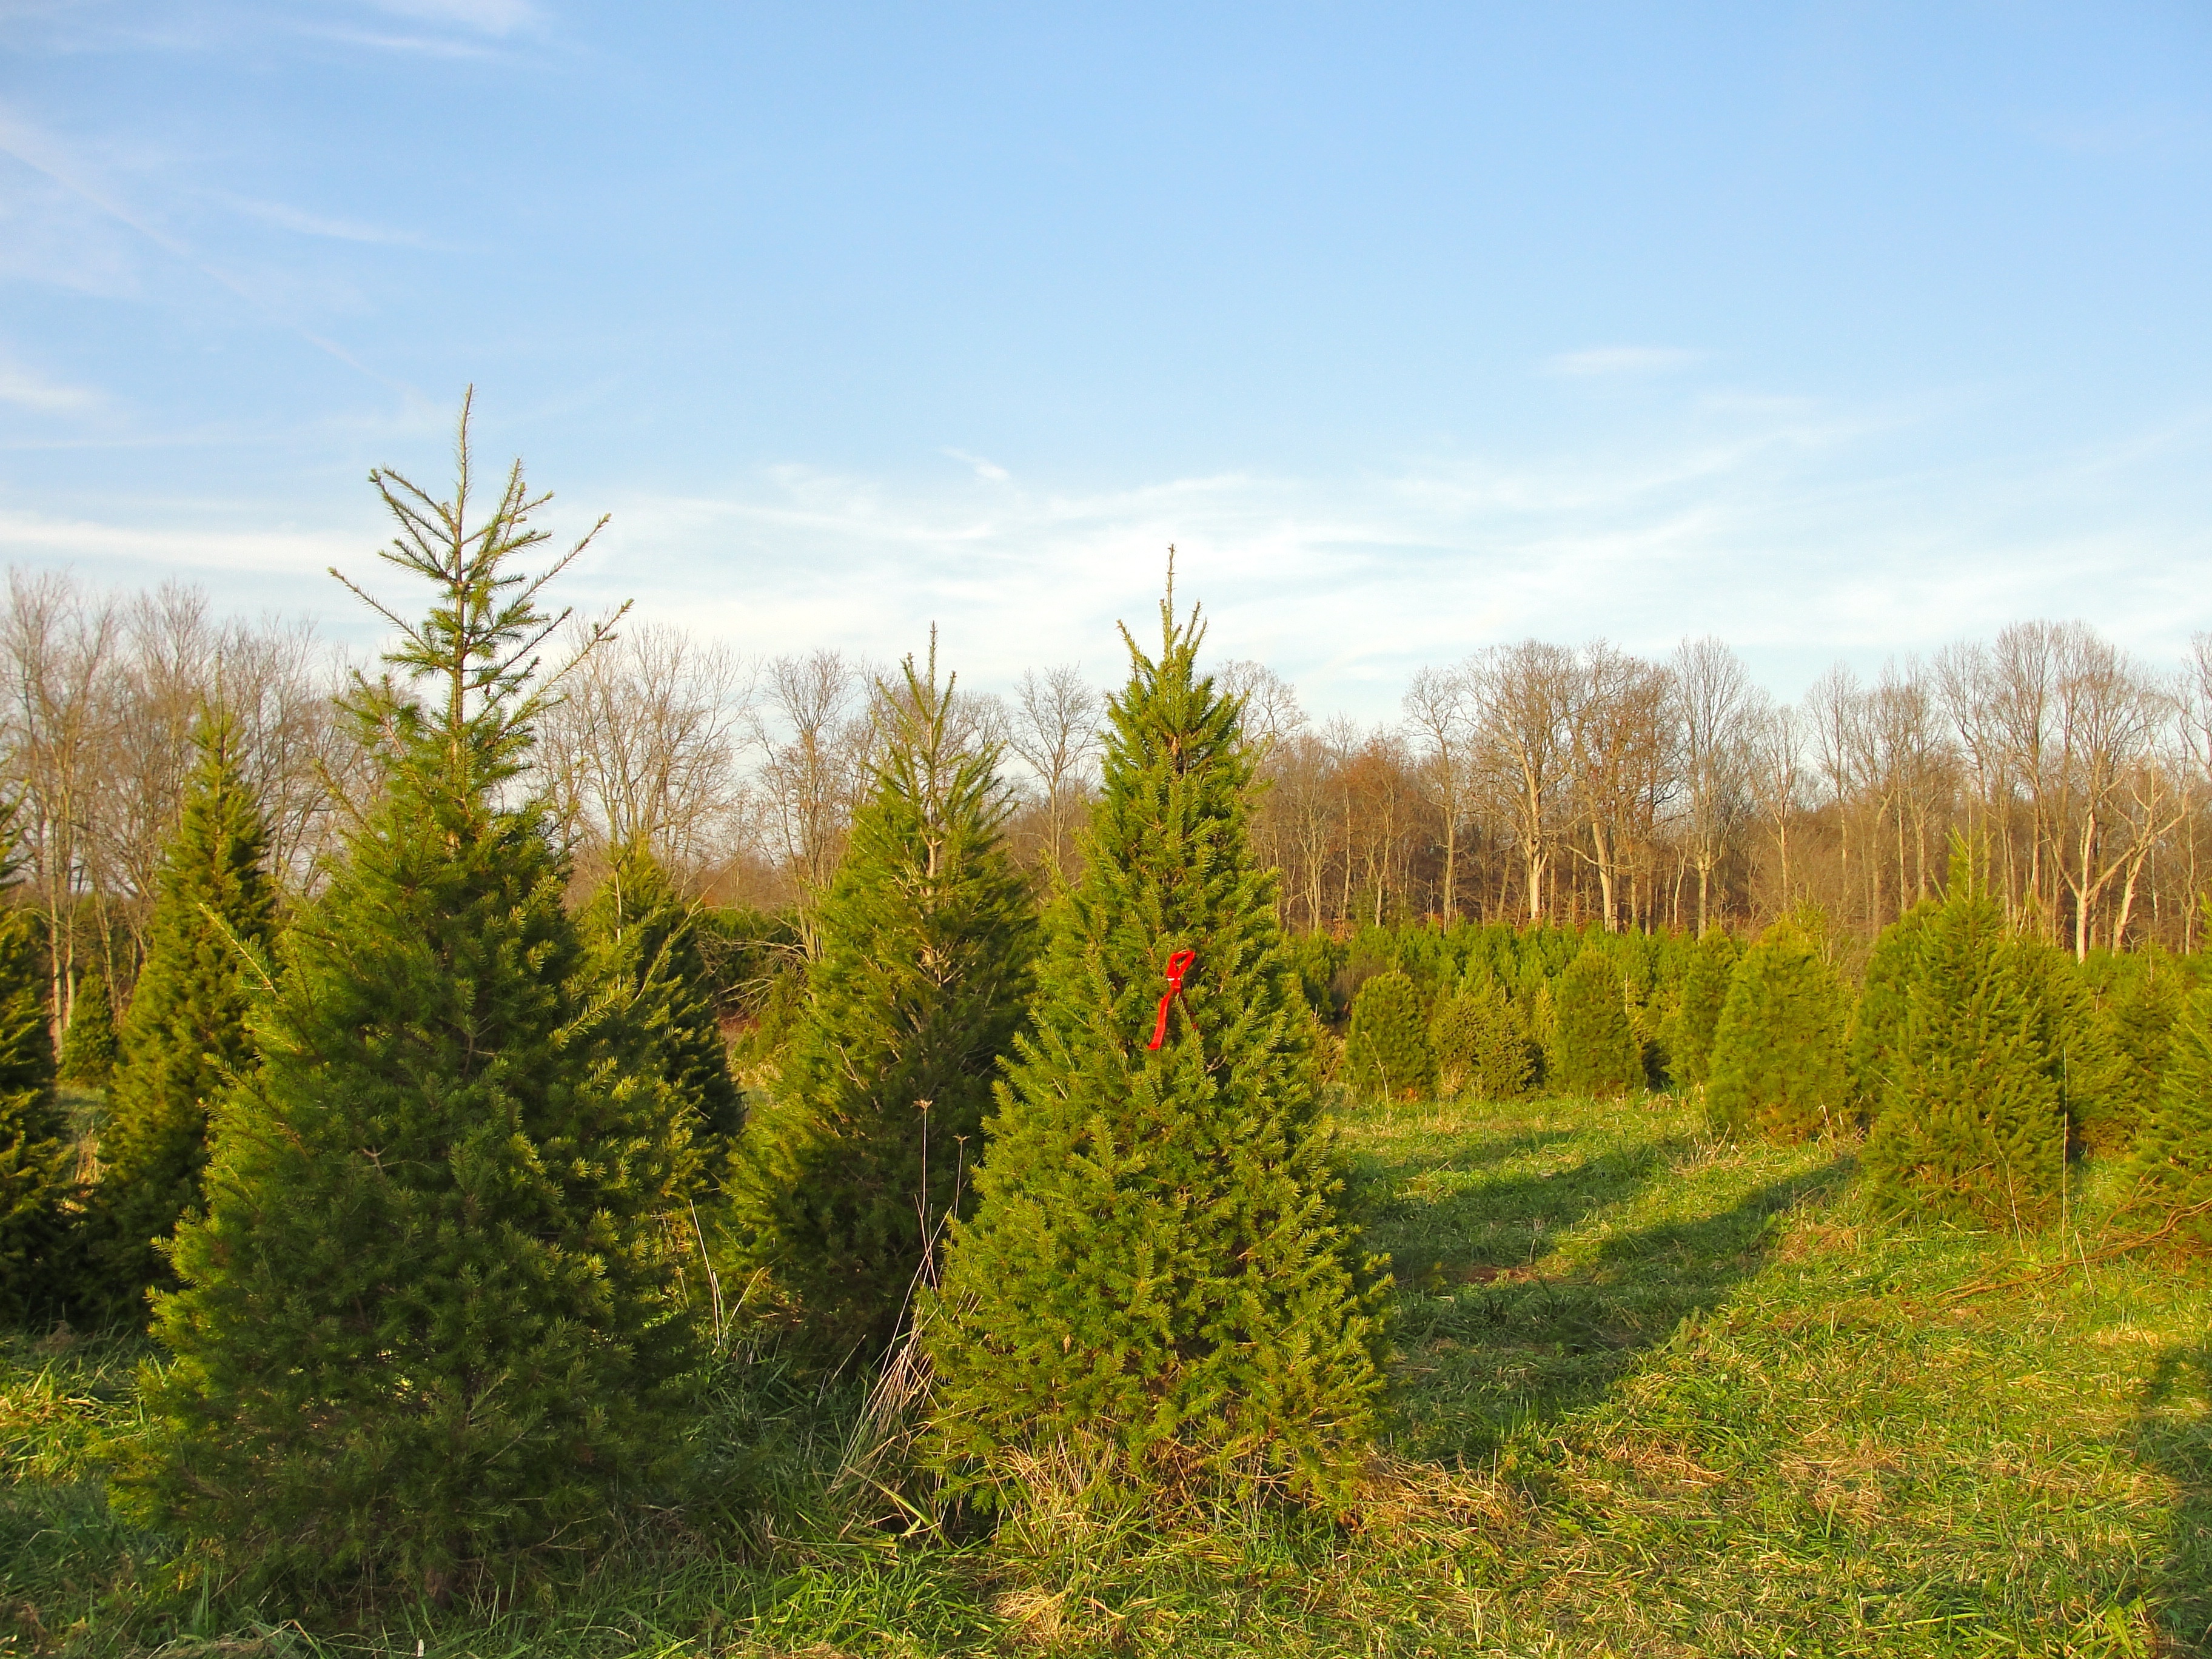 Buying your holiday tree from a local farm.